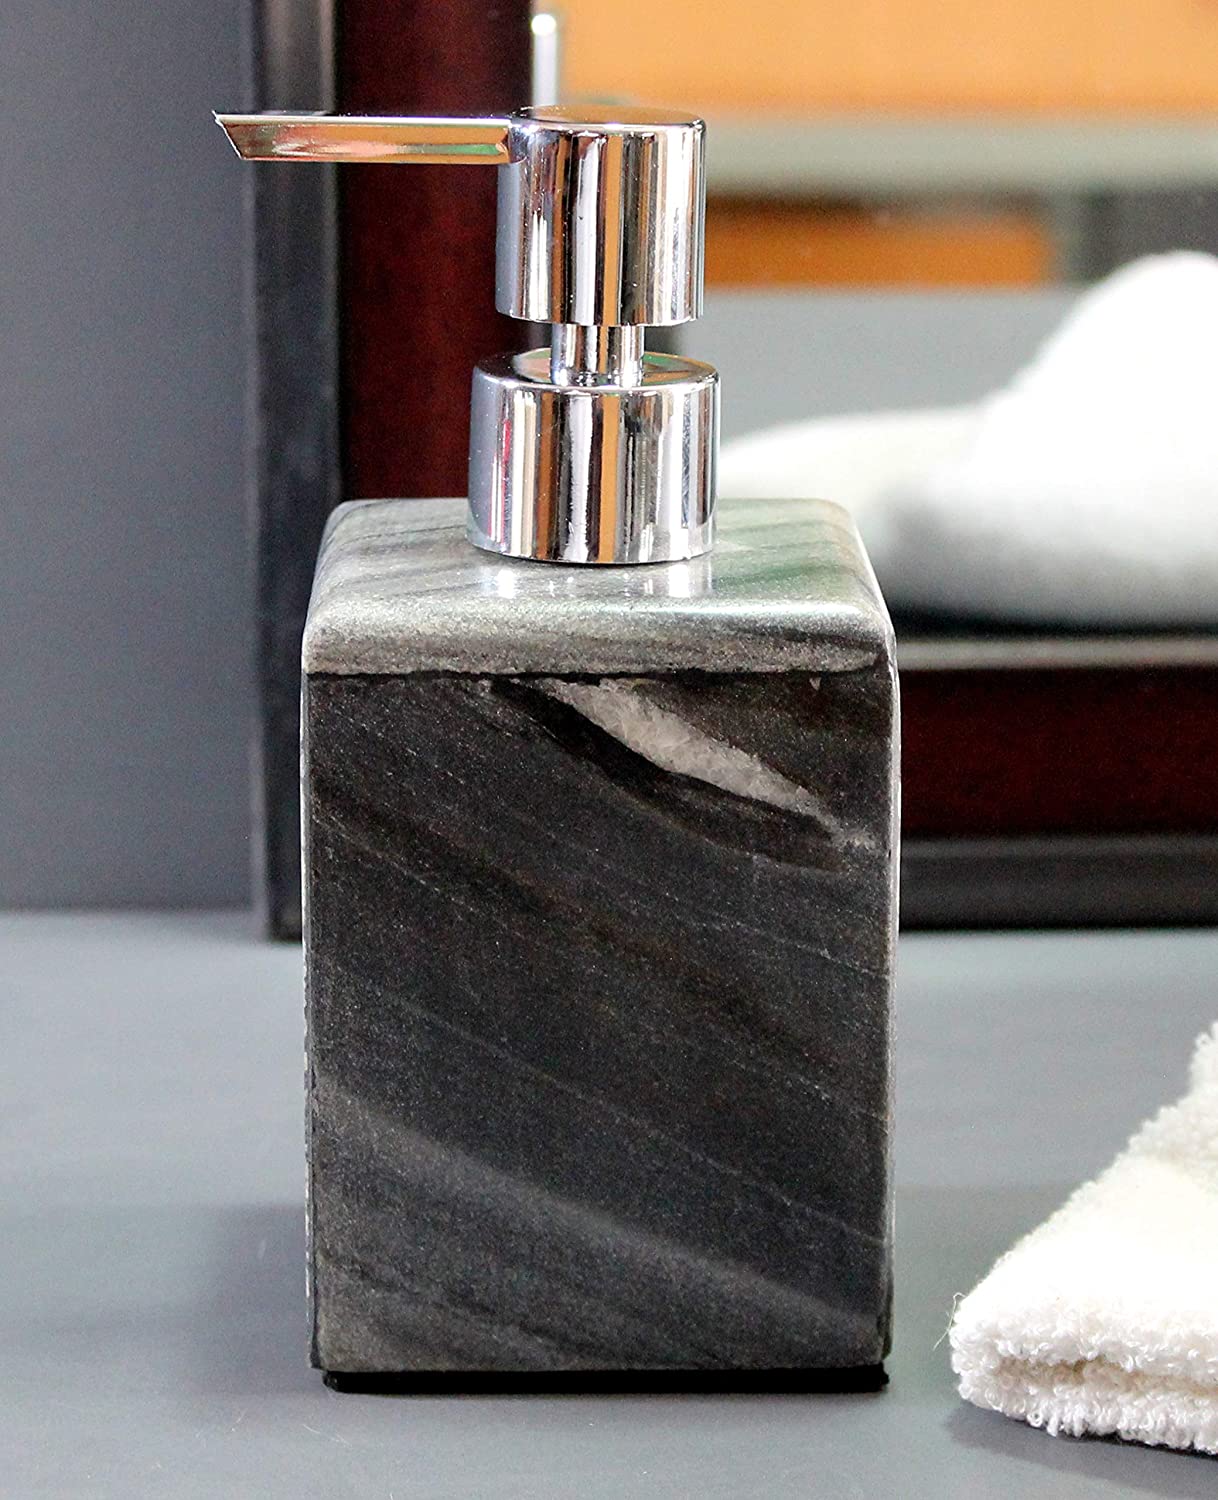 KLEO Soap/Lotion Dispenser - Made of Genuine Indian Marble - Luxury ...